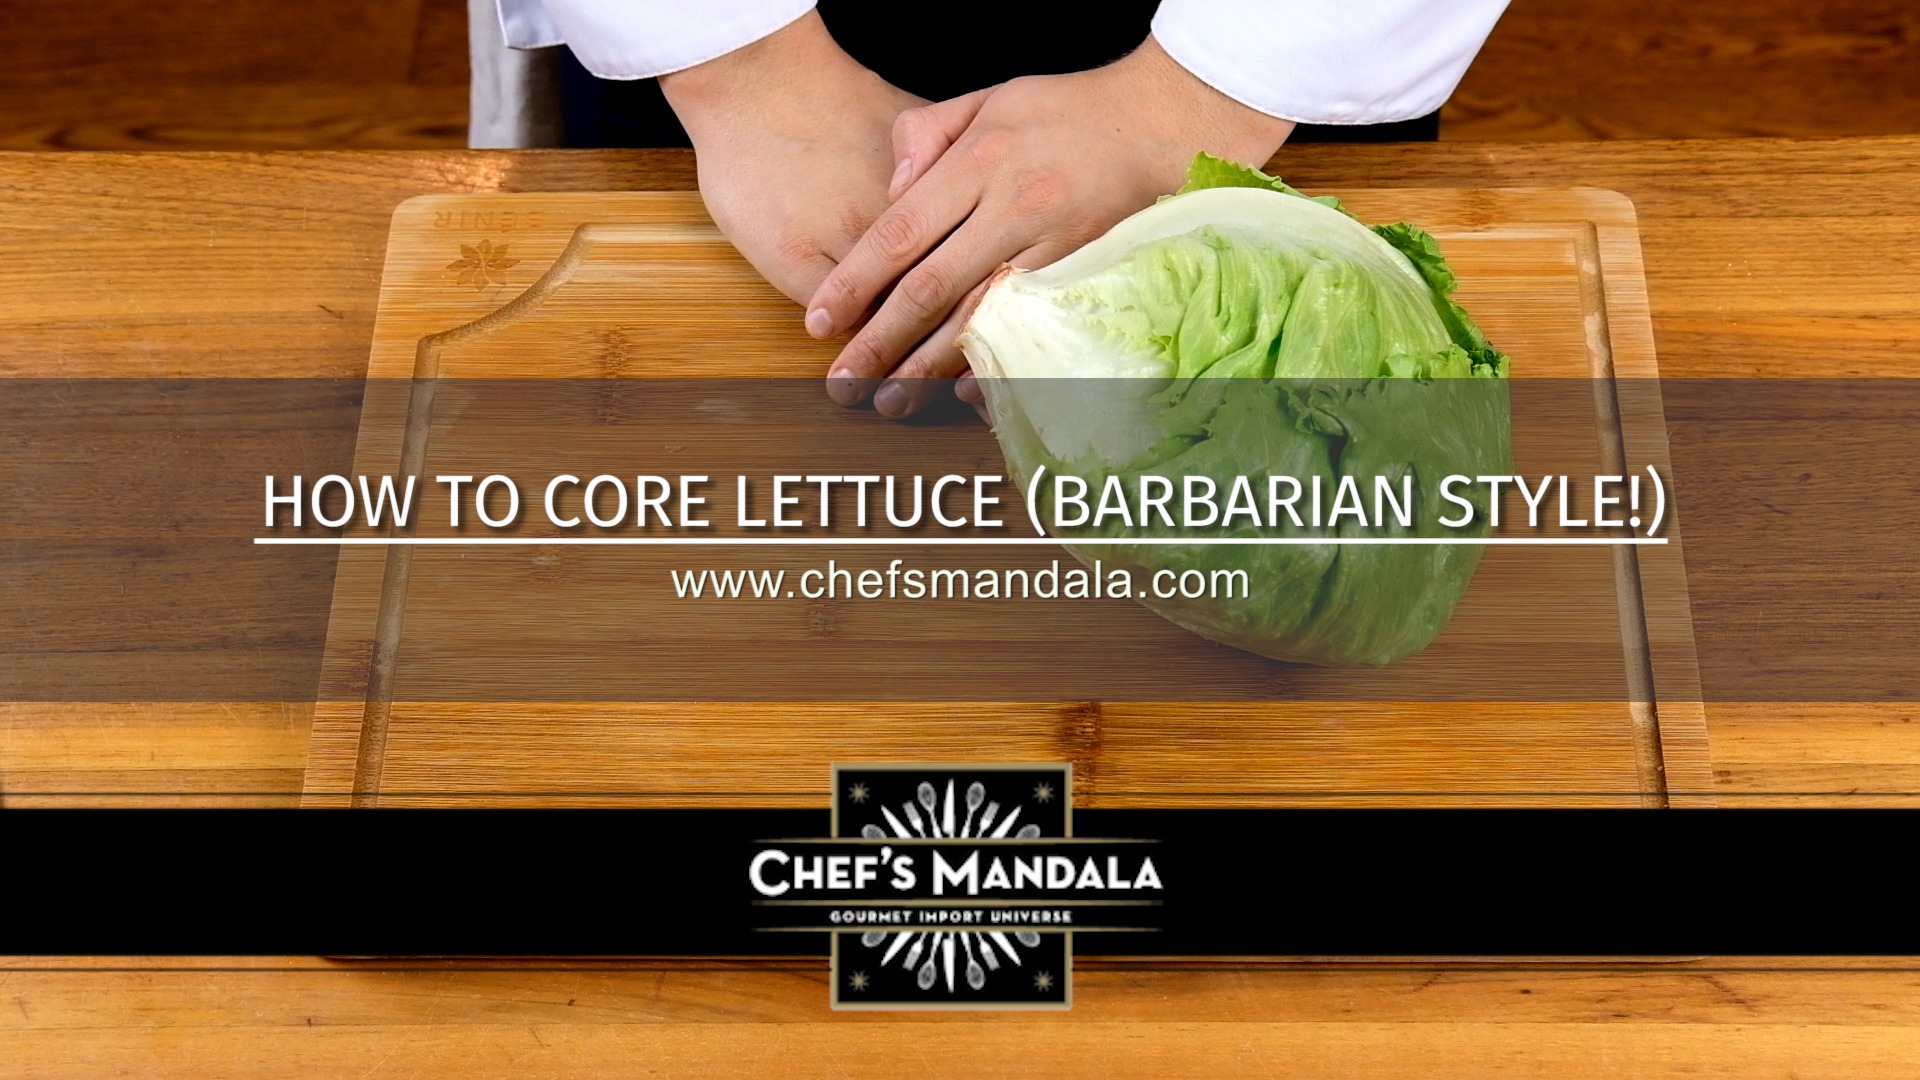 HOW TO CORE LETTUCE (BARBARIAN STYLE)